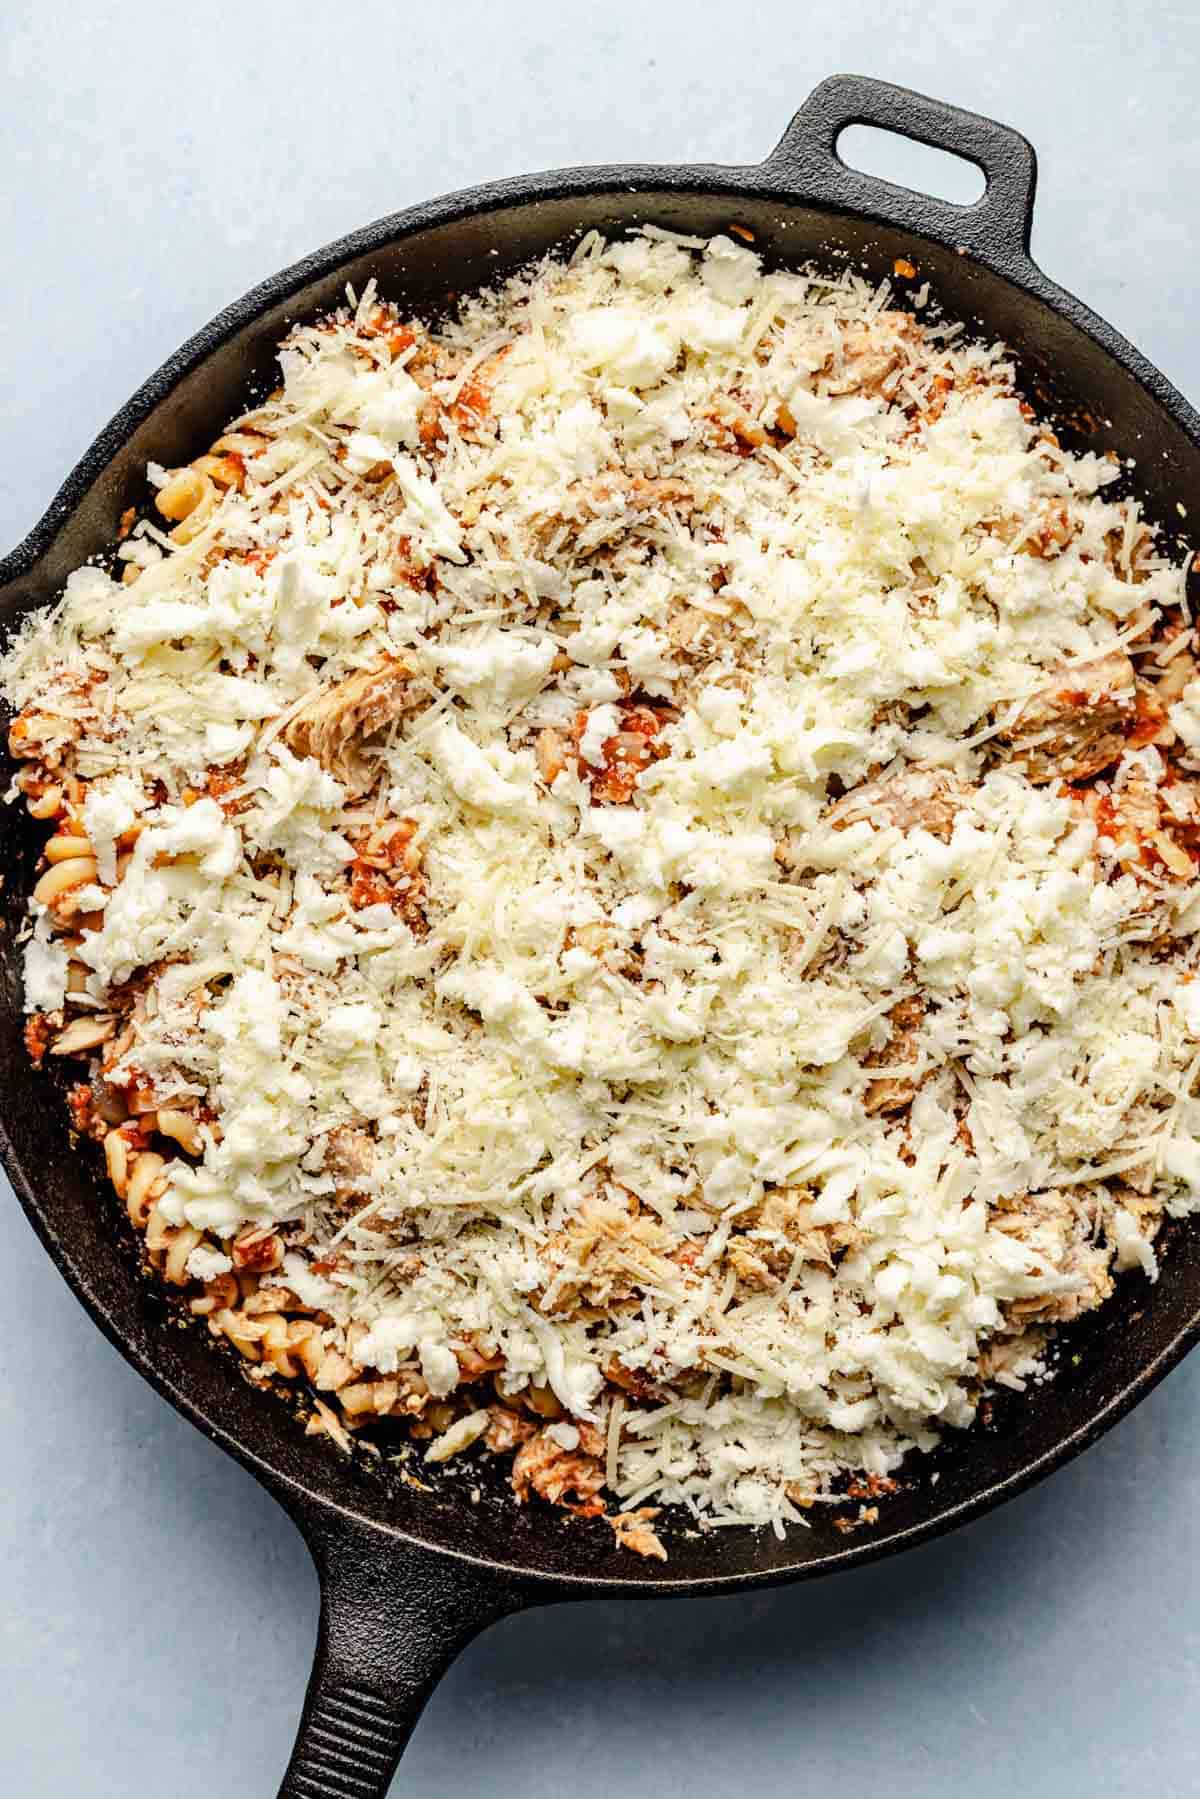 shredded mozzarella cheese and parmesan cheese sprinkled on top of pasta in cast iron skillet